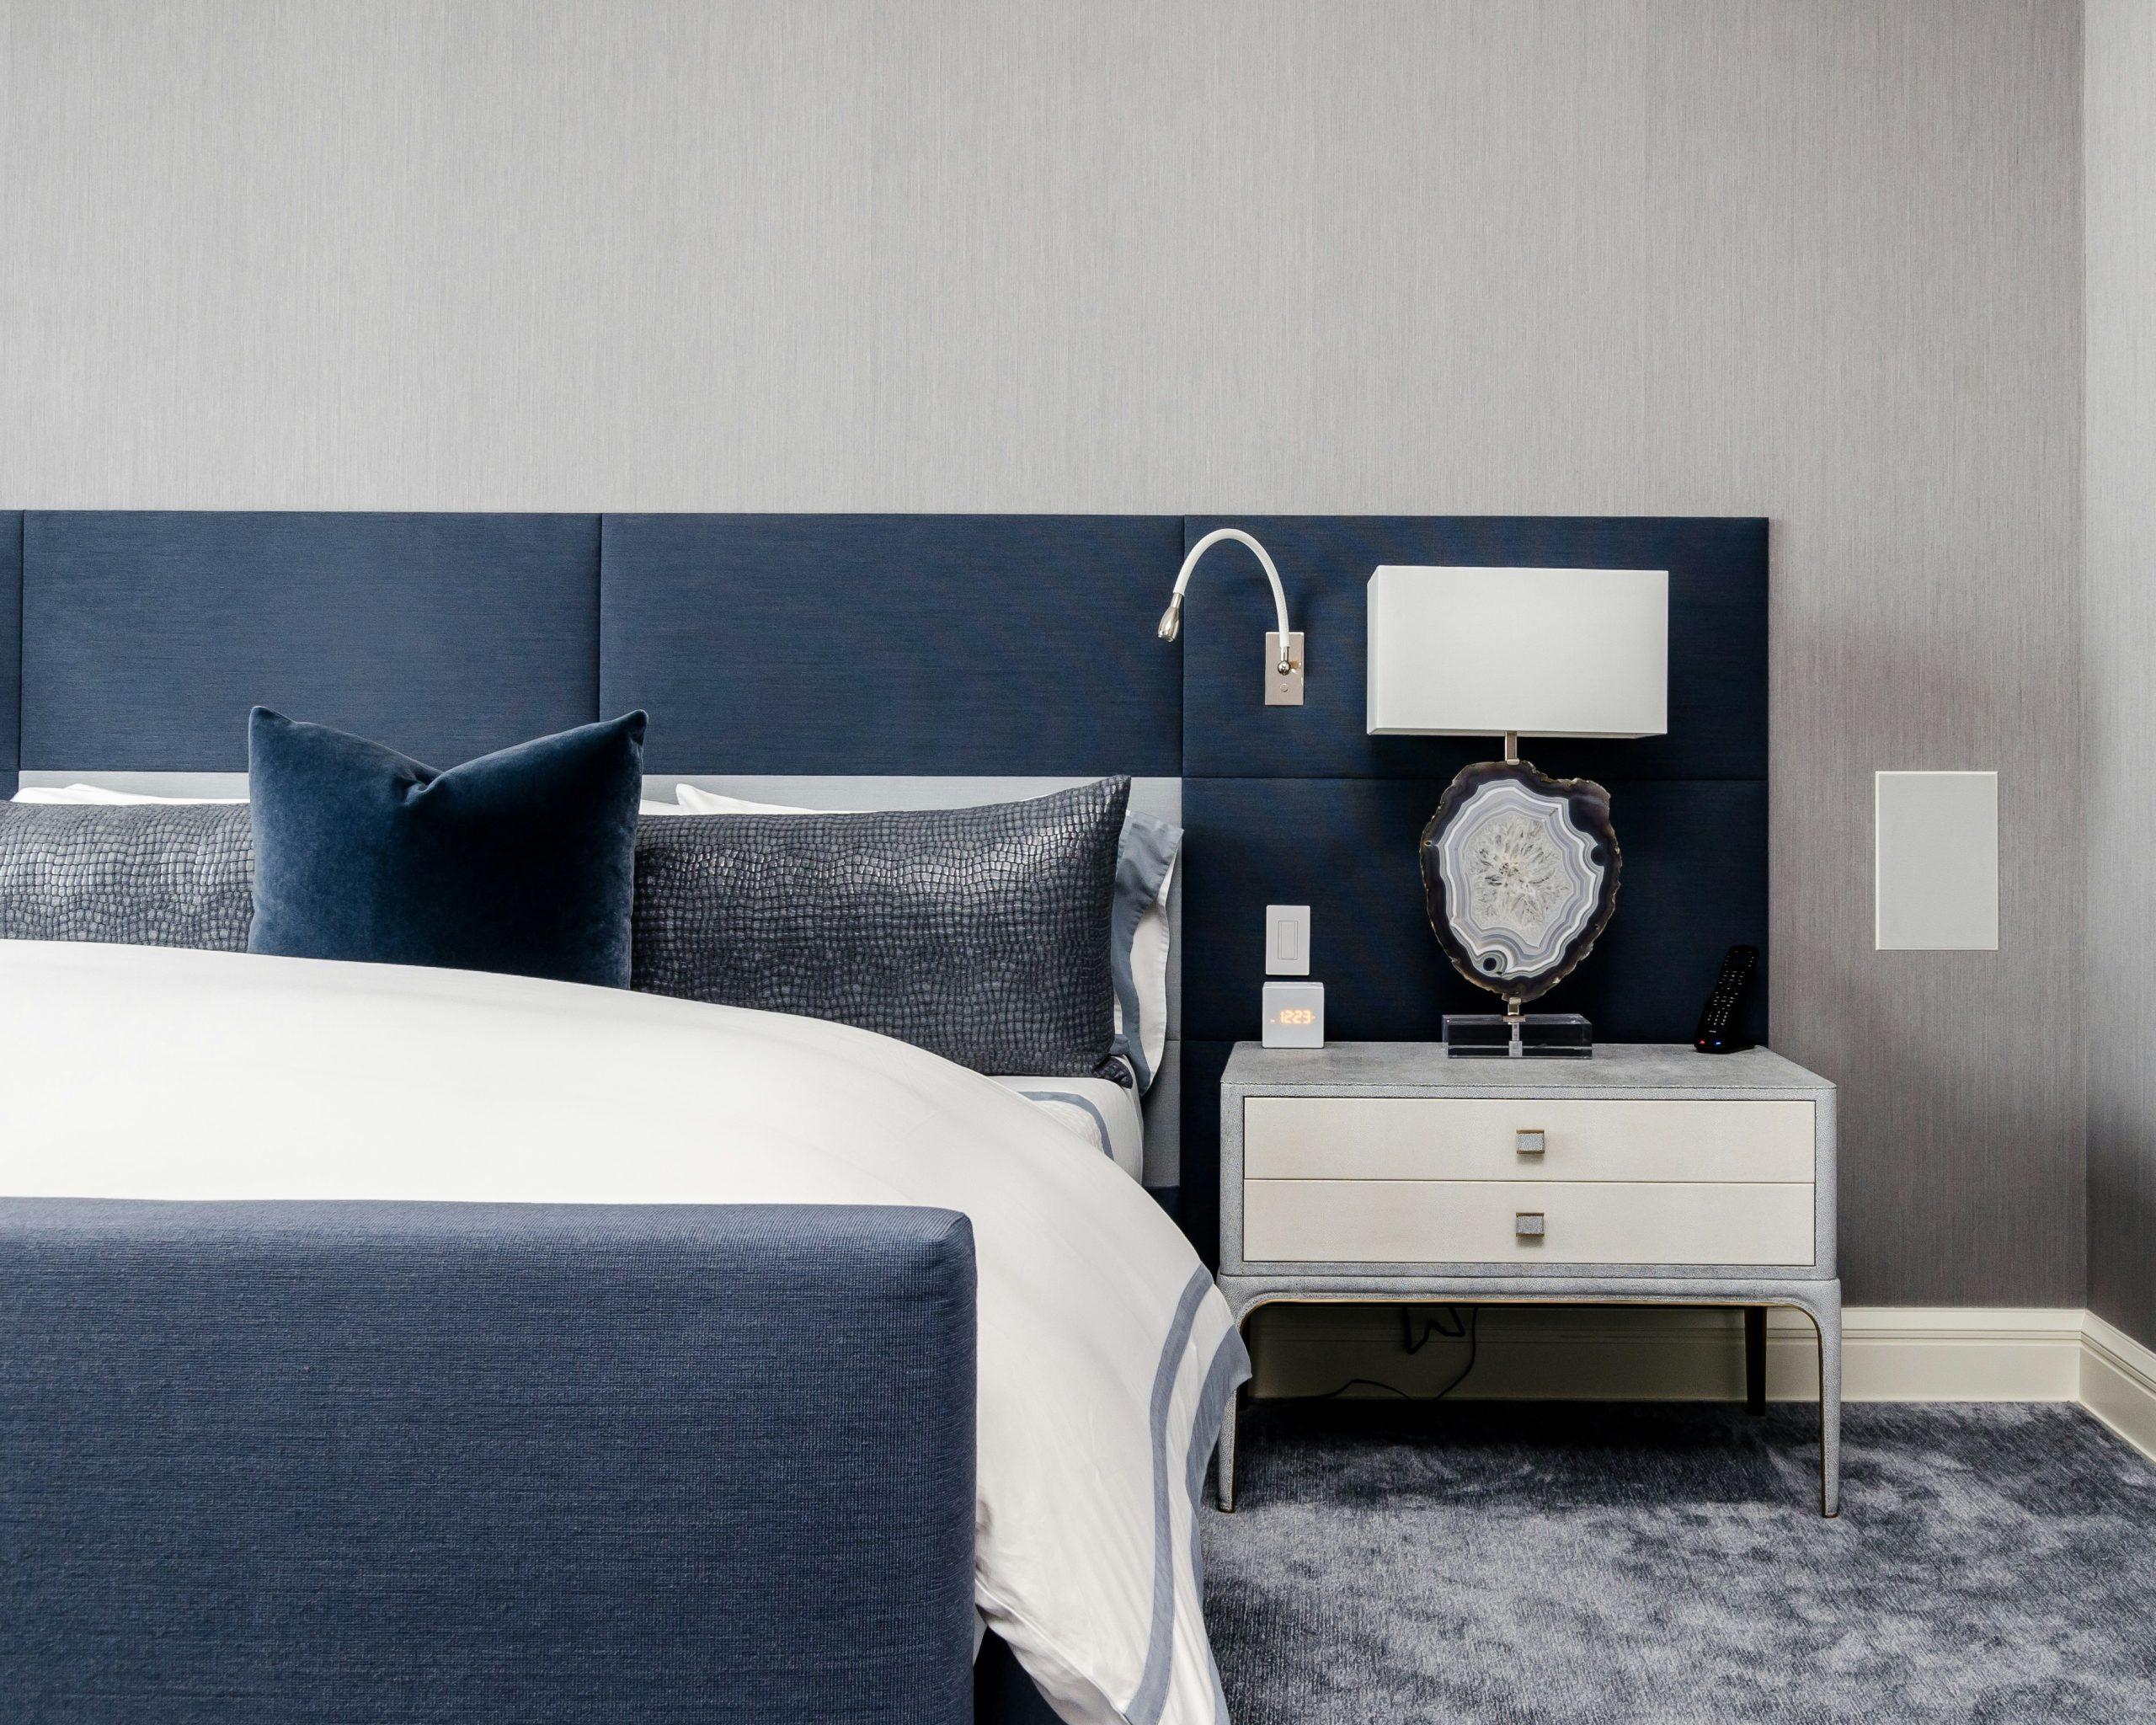 discover a wide range of bedroom furniture to suit any style and budget. from beds to wardrobes, find the perfect pieces to complete your bedroom design.